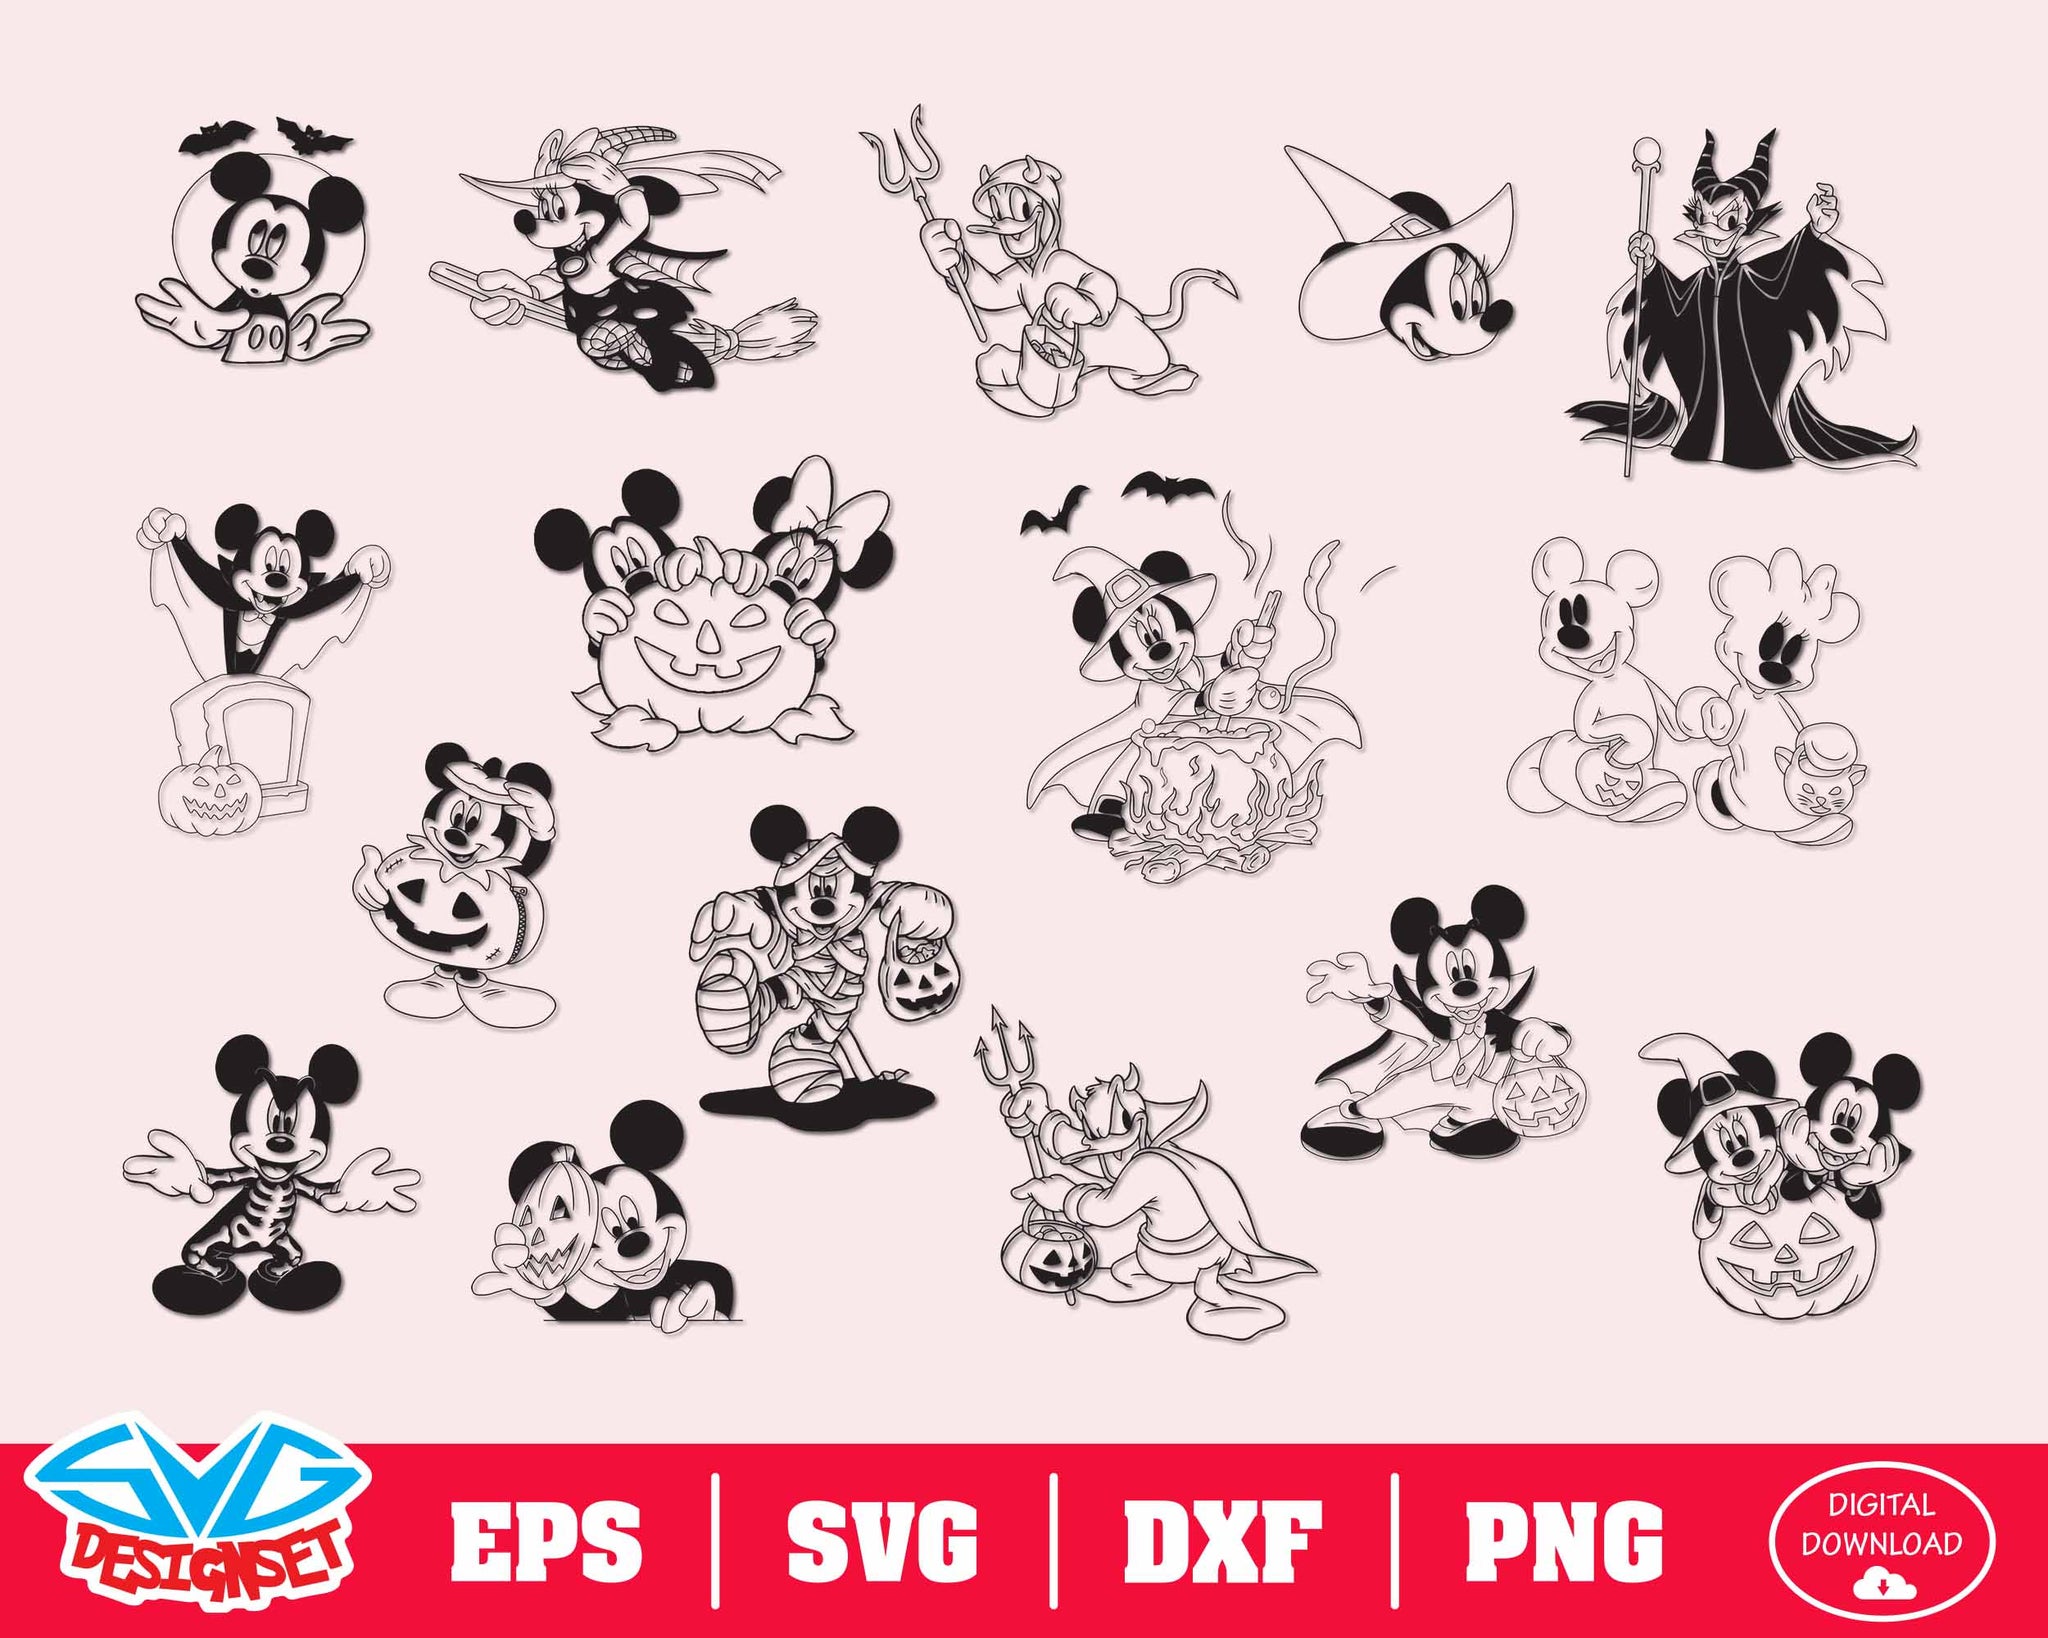 Disney Halloween Svg, Dxf, Eps, Png, Clipart, Silhouette and Cutfiles #2 - SVGDesignSets